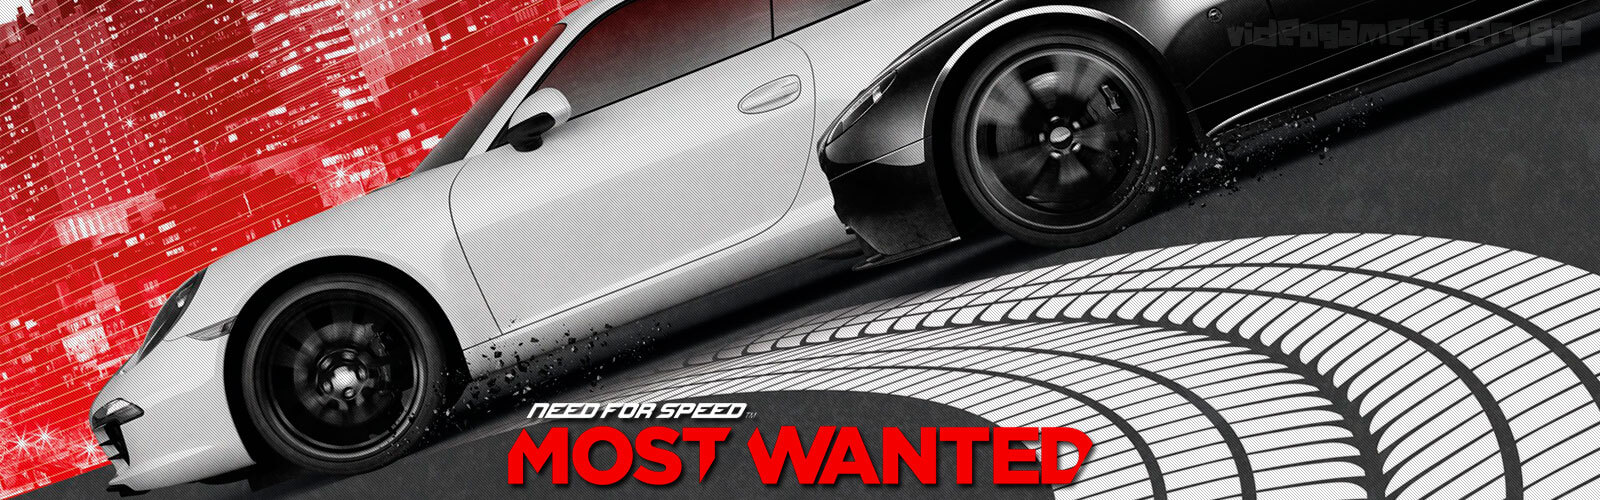 Análise - Need for Speed: Most Wanted (PS3) Cover